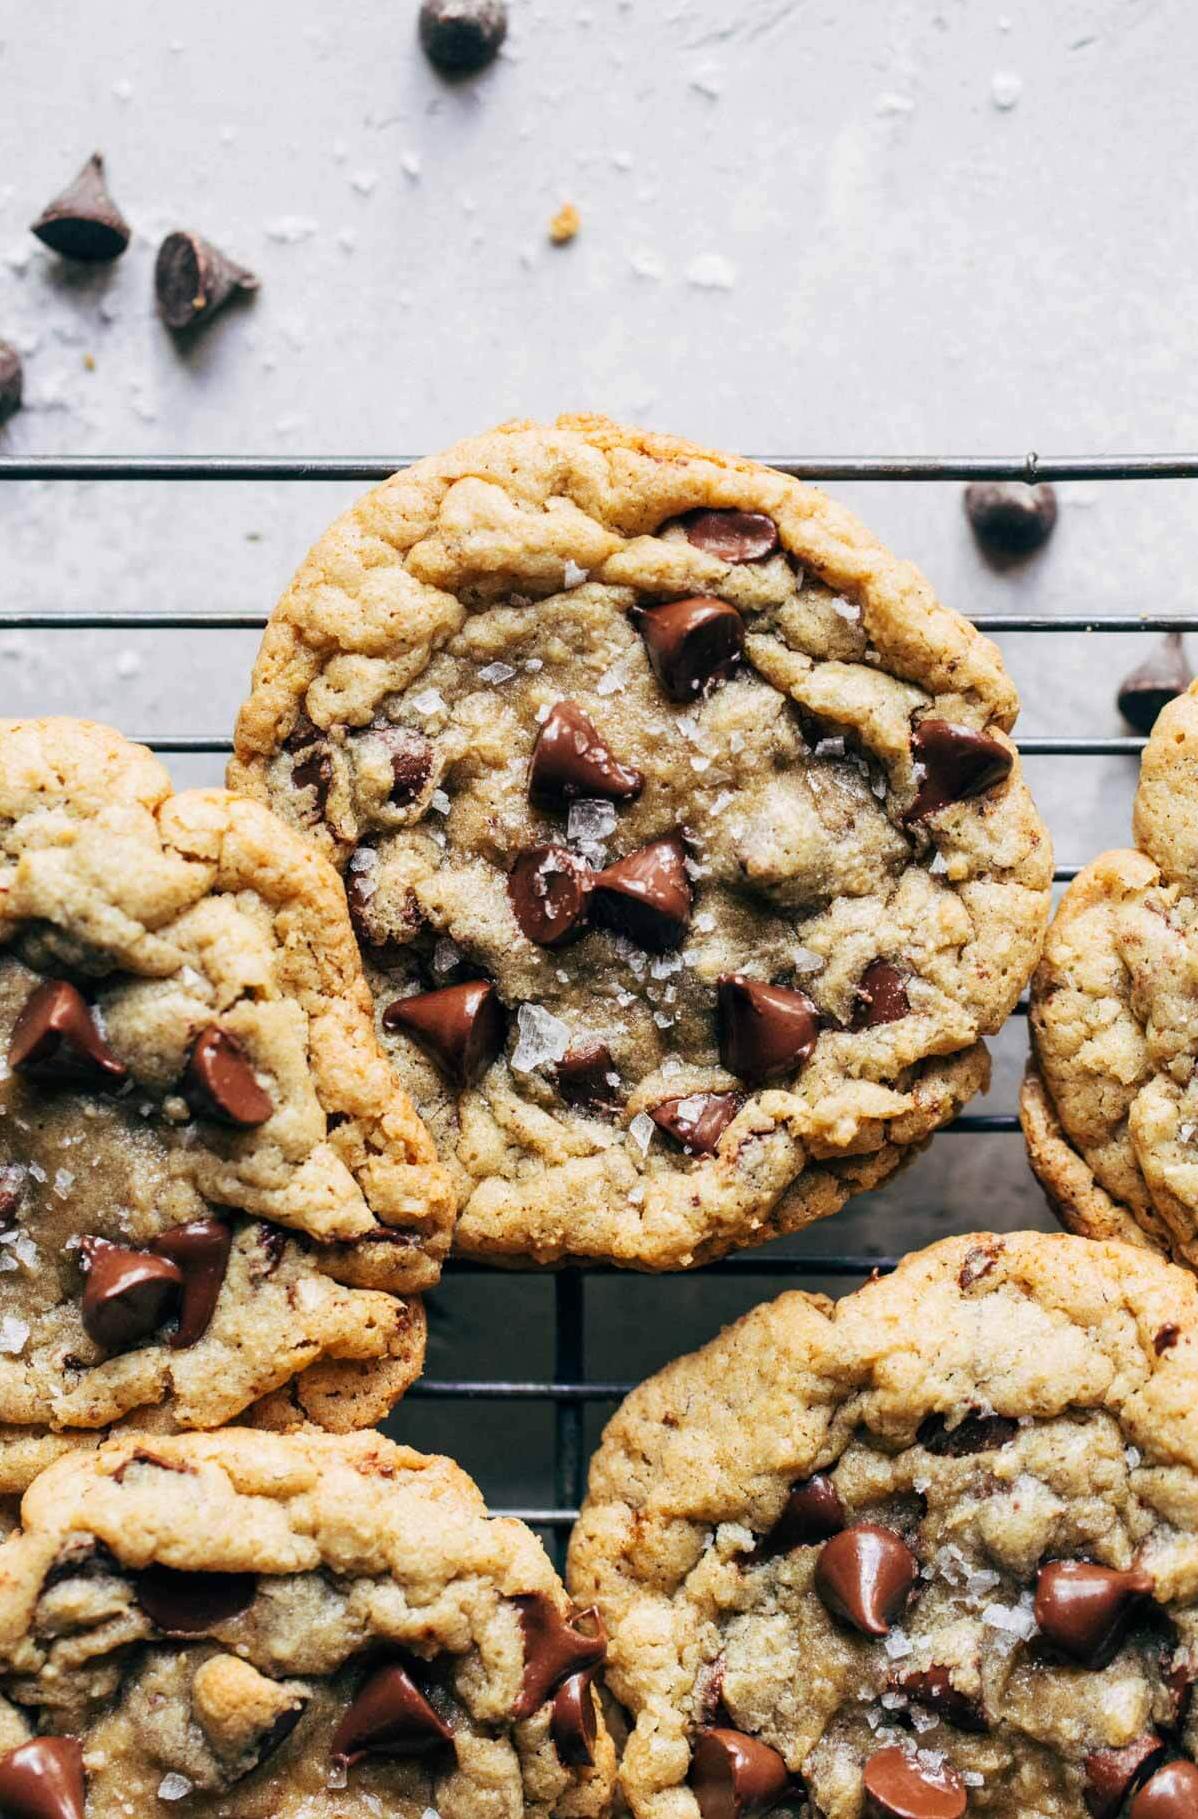  This recipe is so easy, even a baking newbie can make perfect cookies.